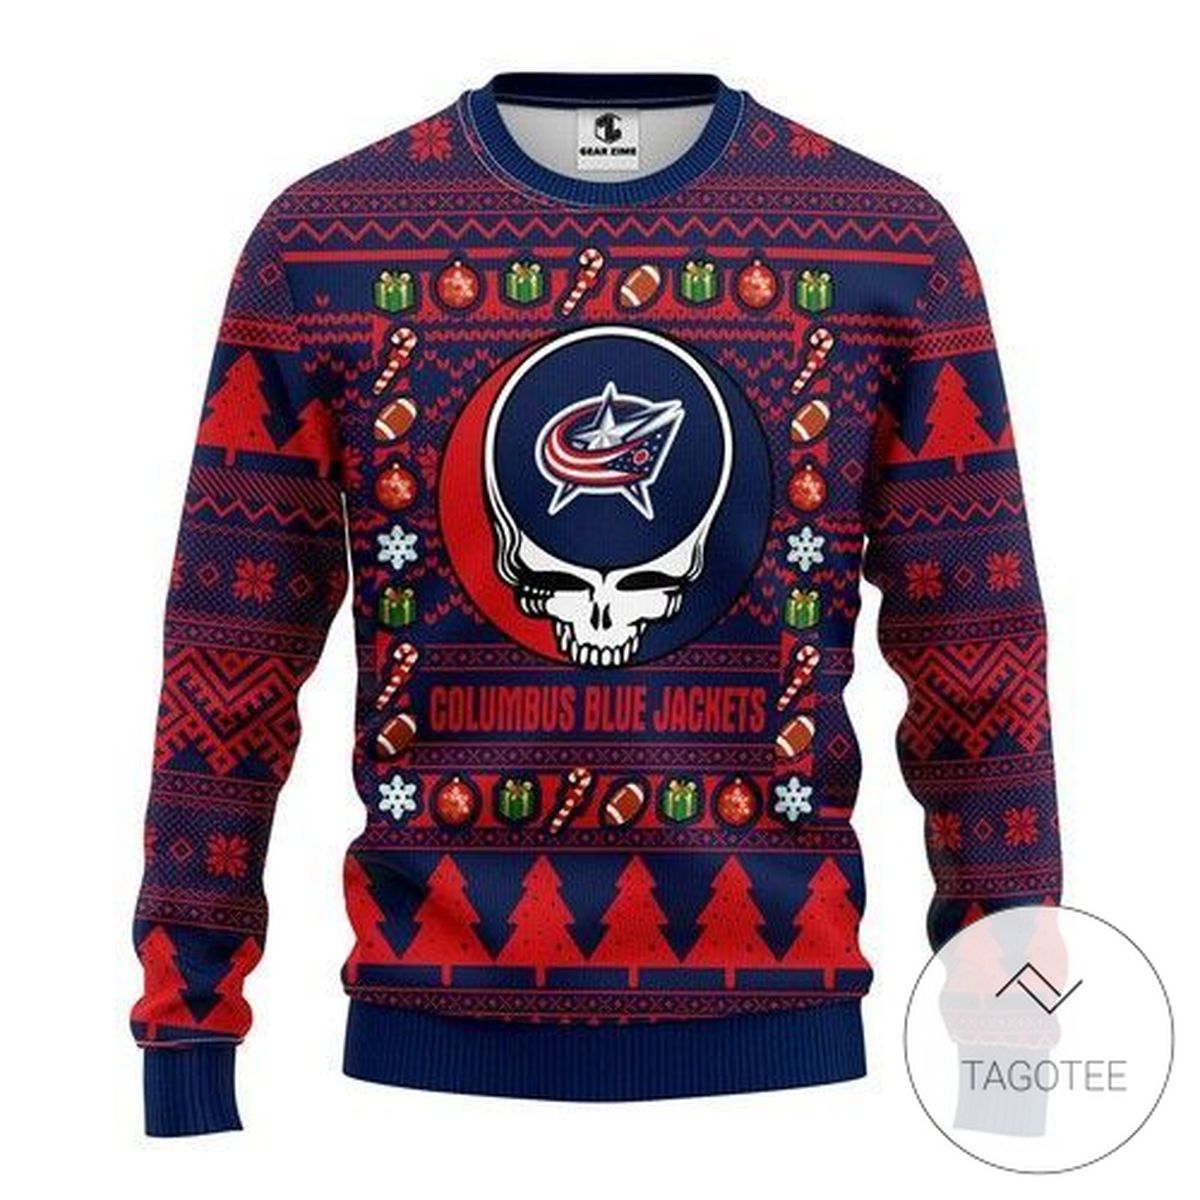 Nhl Columbus Blue Jackets Grateful Dead Ugly Christmas Sweater